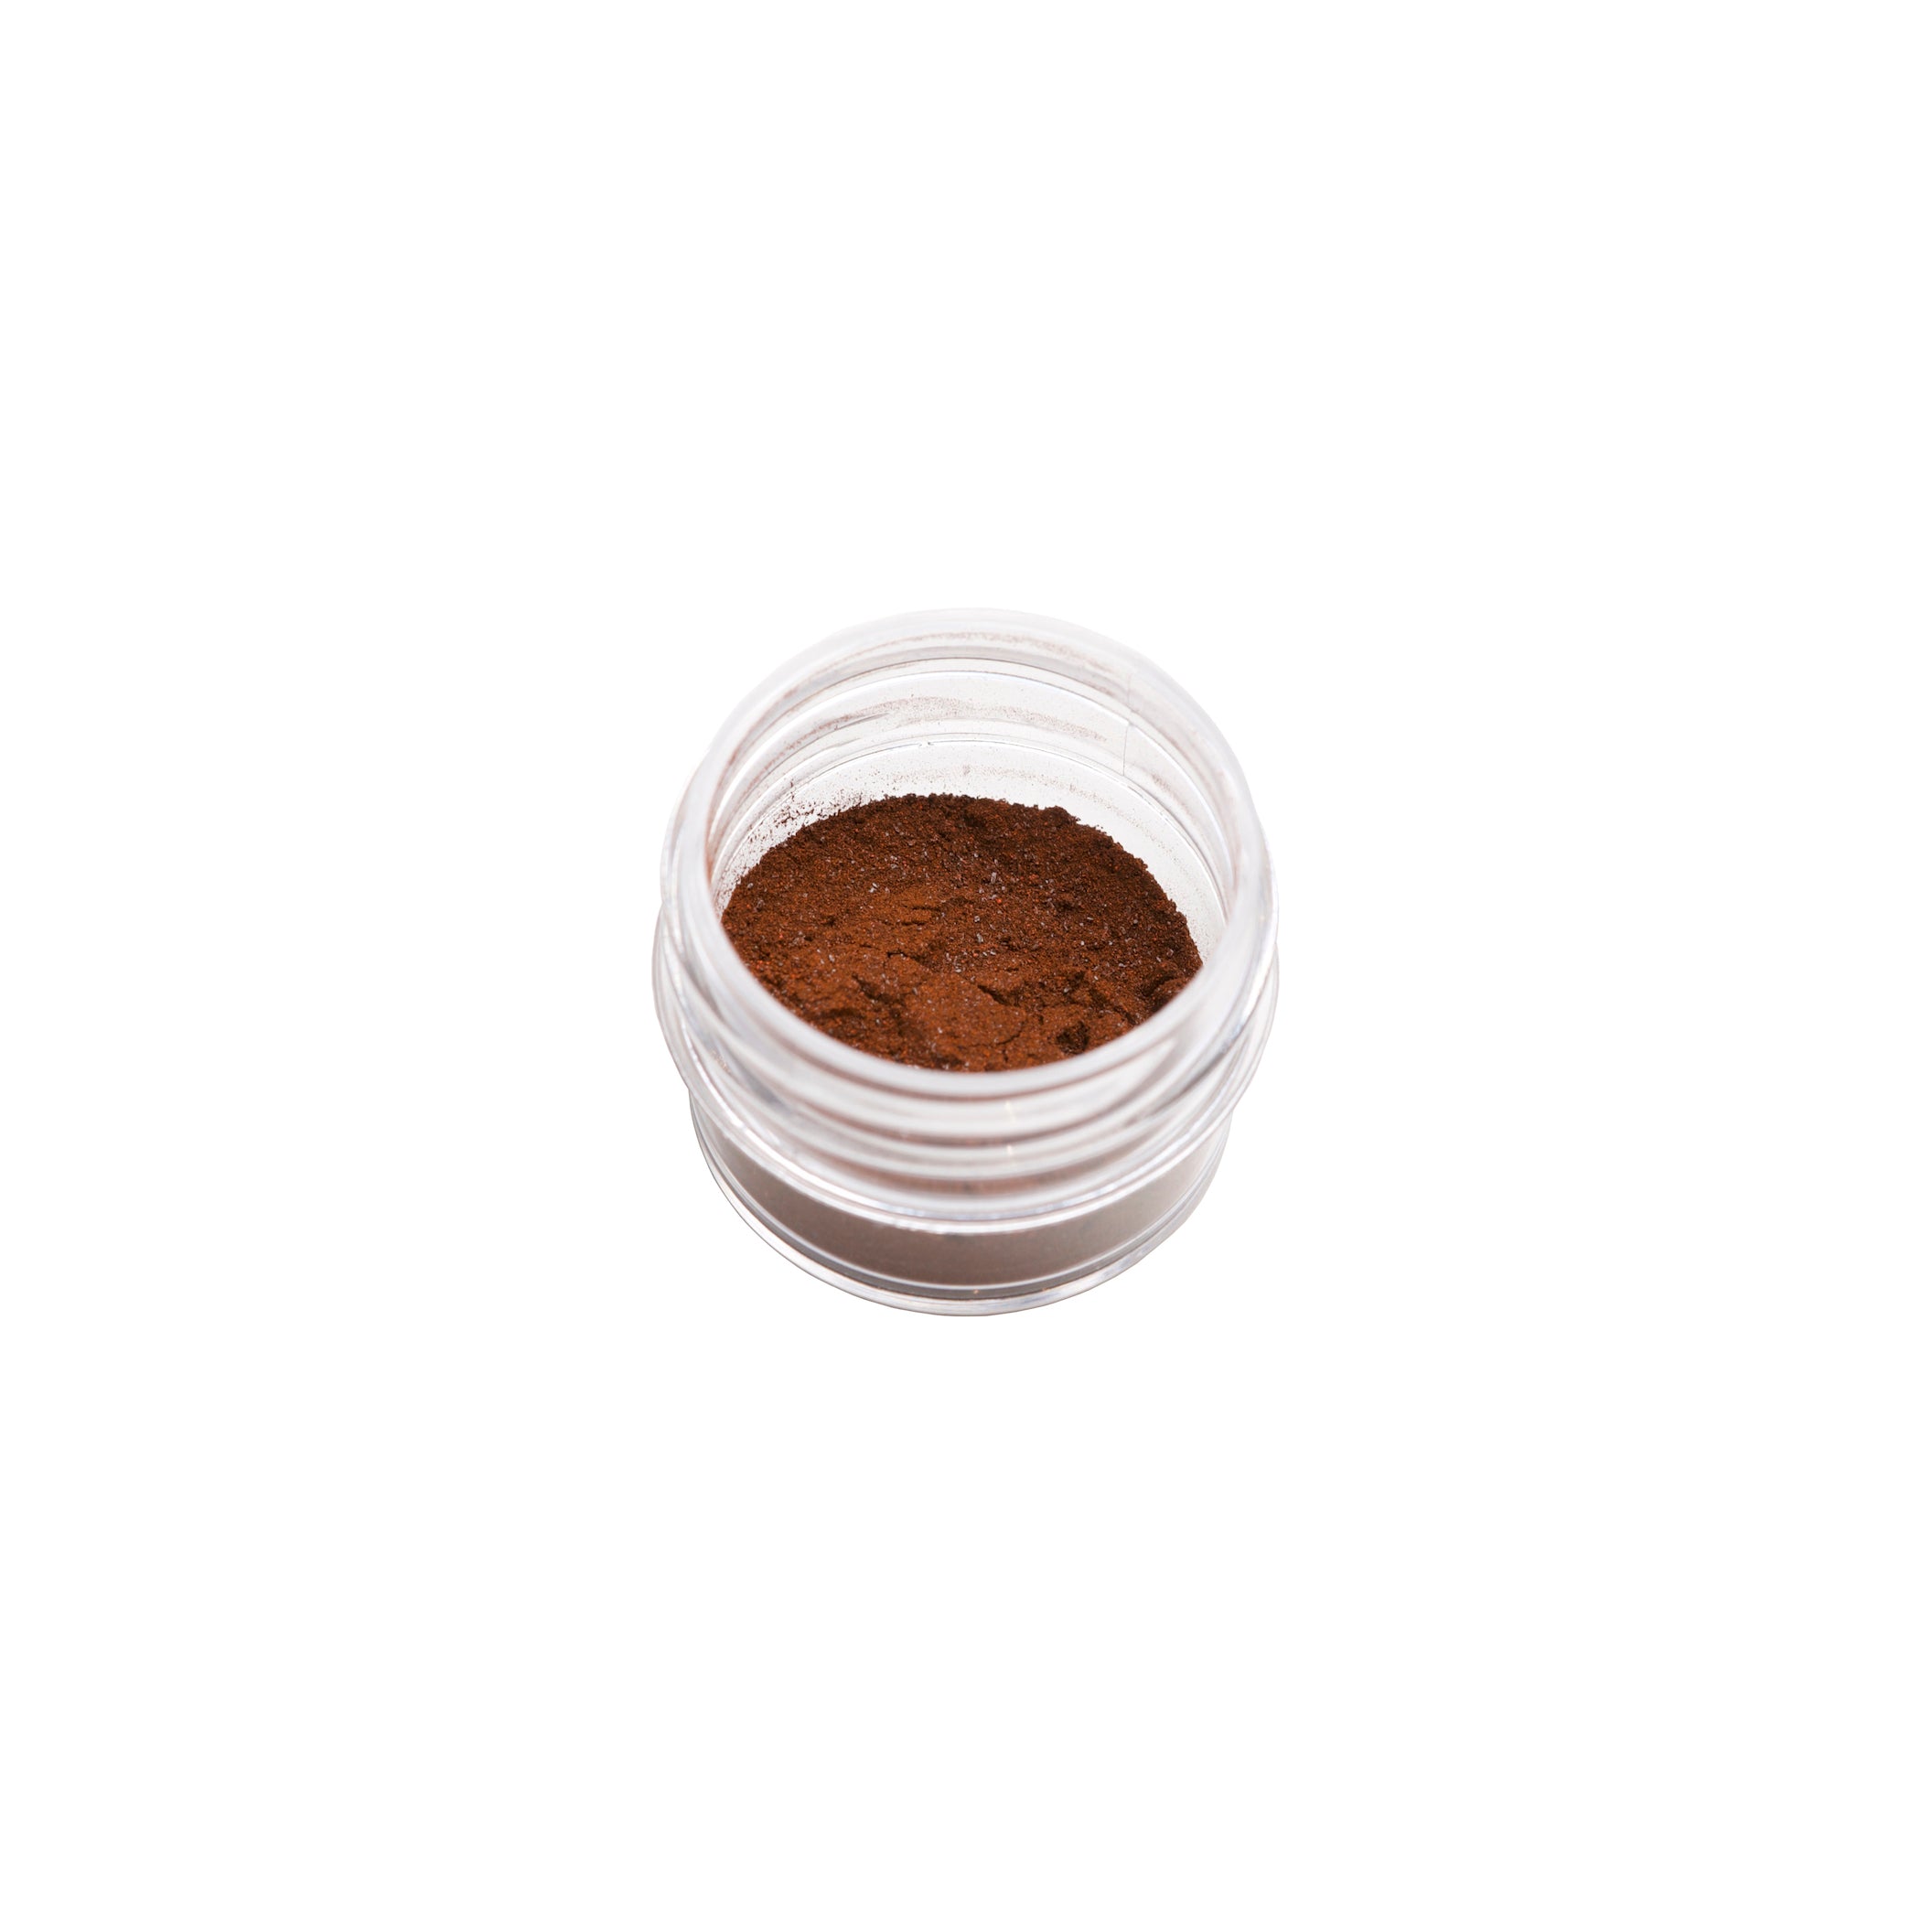 GUSTA SUPPLIES Chocolate Brown Water-Soluble Food Colouring Powder, 2g